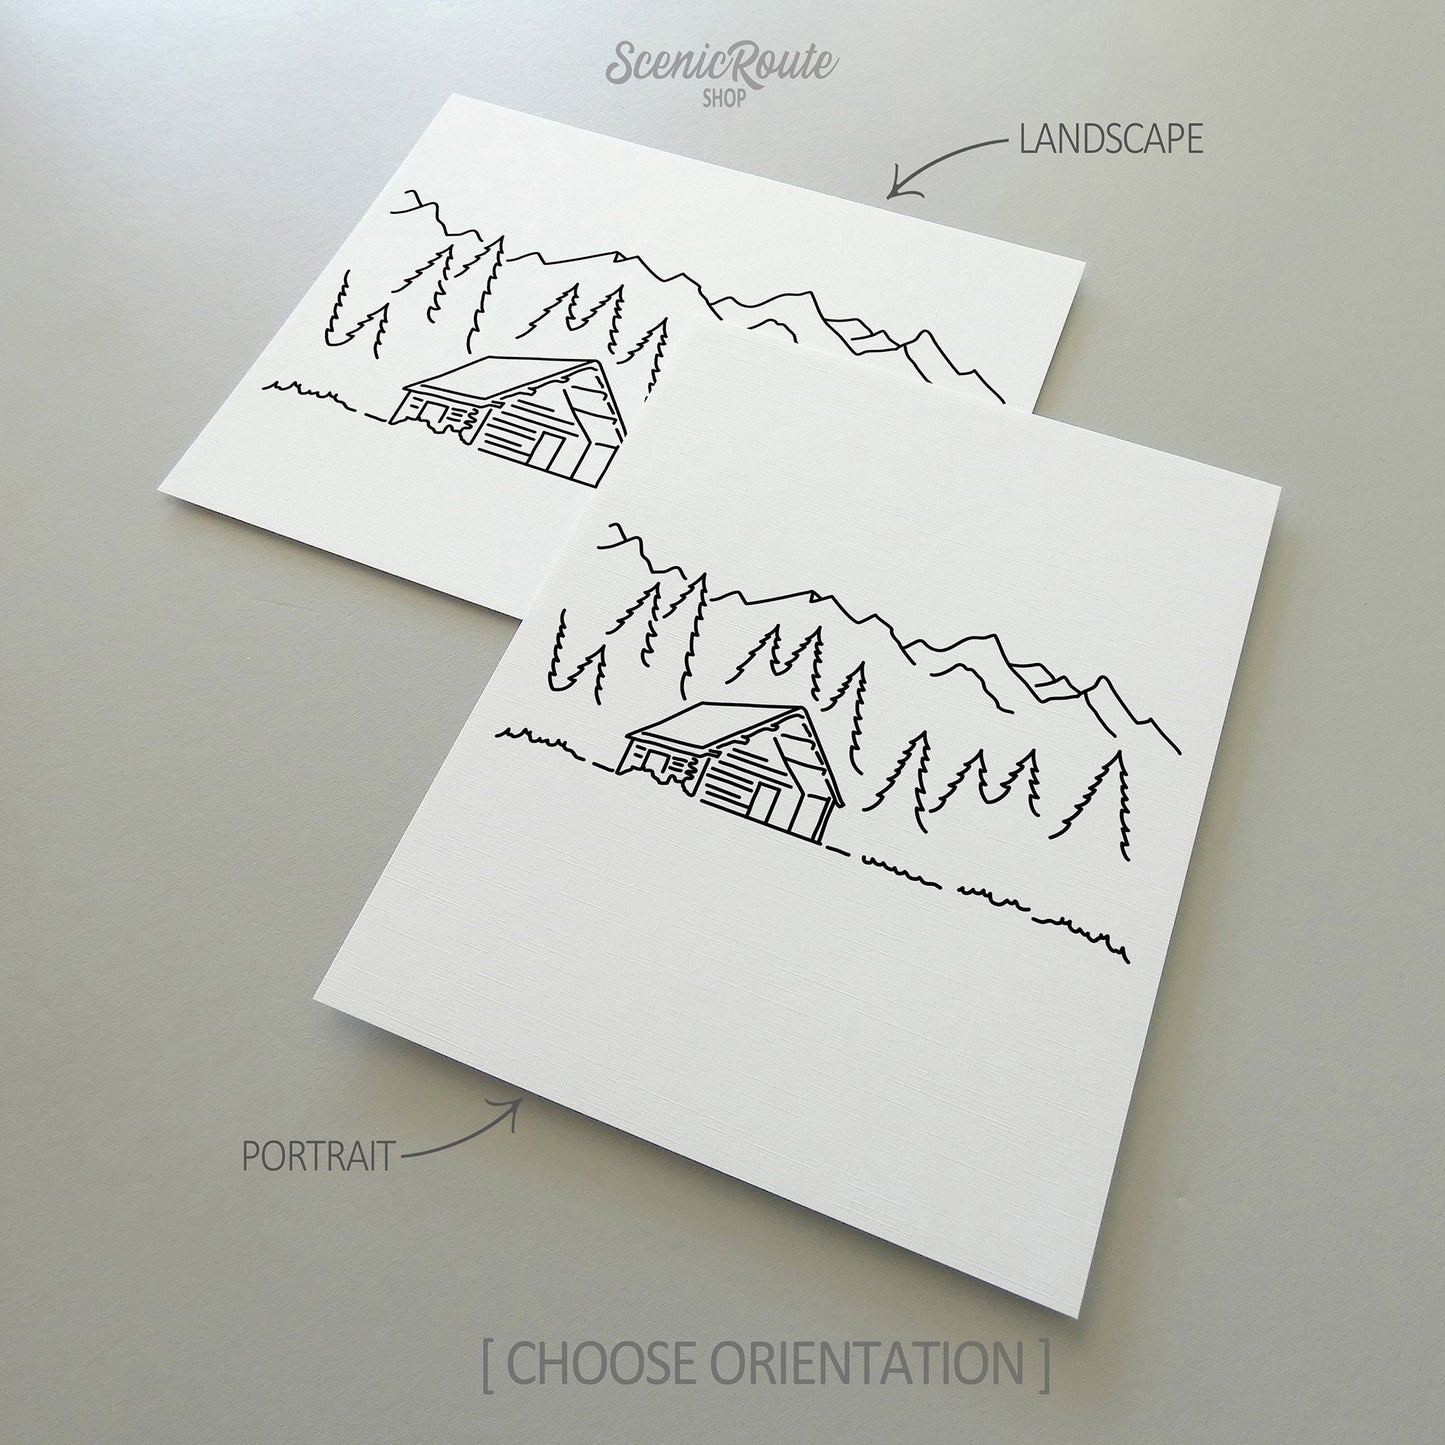 Two line art drawings of a Log Cabin on white linen paper with a gray background.  The pieces are shown in portrait and landscape orientation for the available art print options.